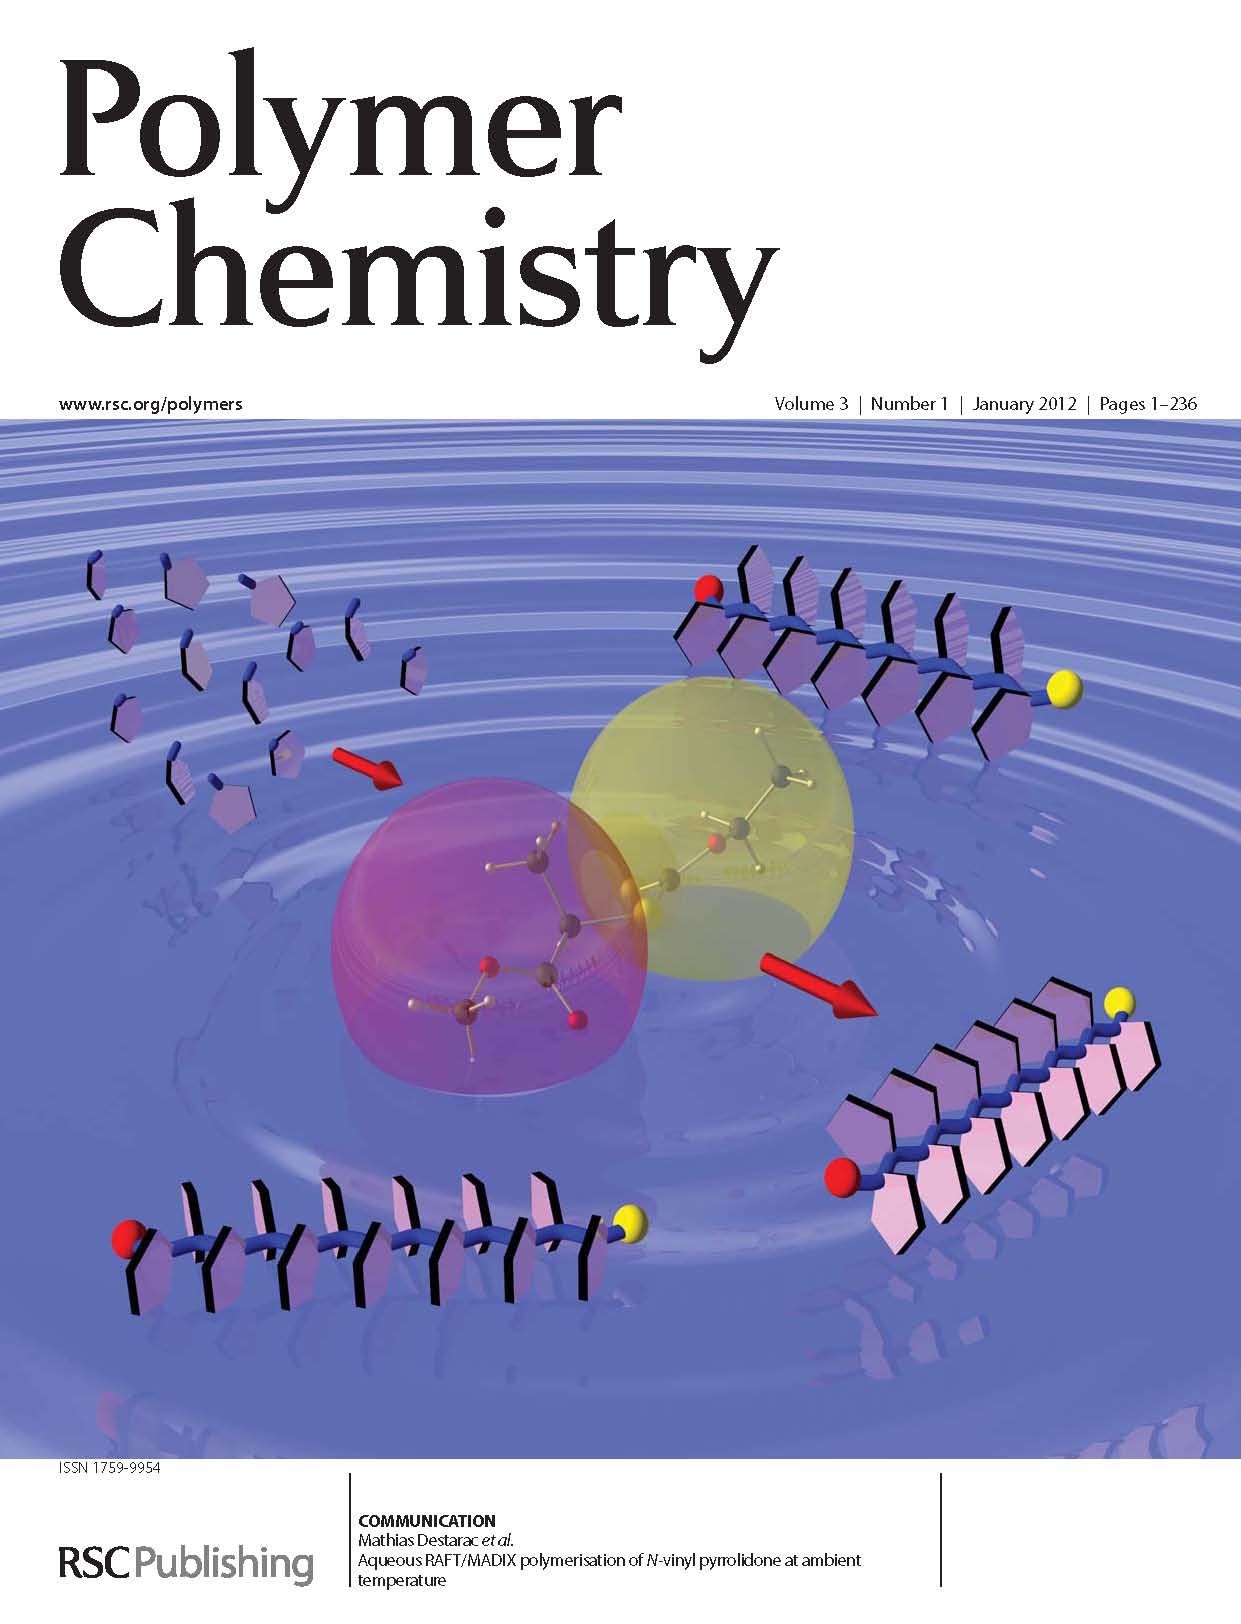 Polymer Chemistry Issue 1 of 2012 out now! – Polymer Chemistry Blog